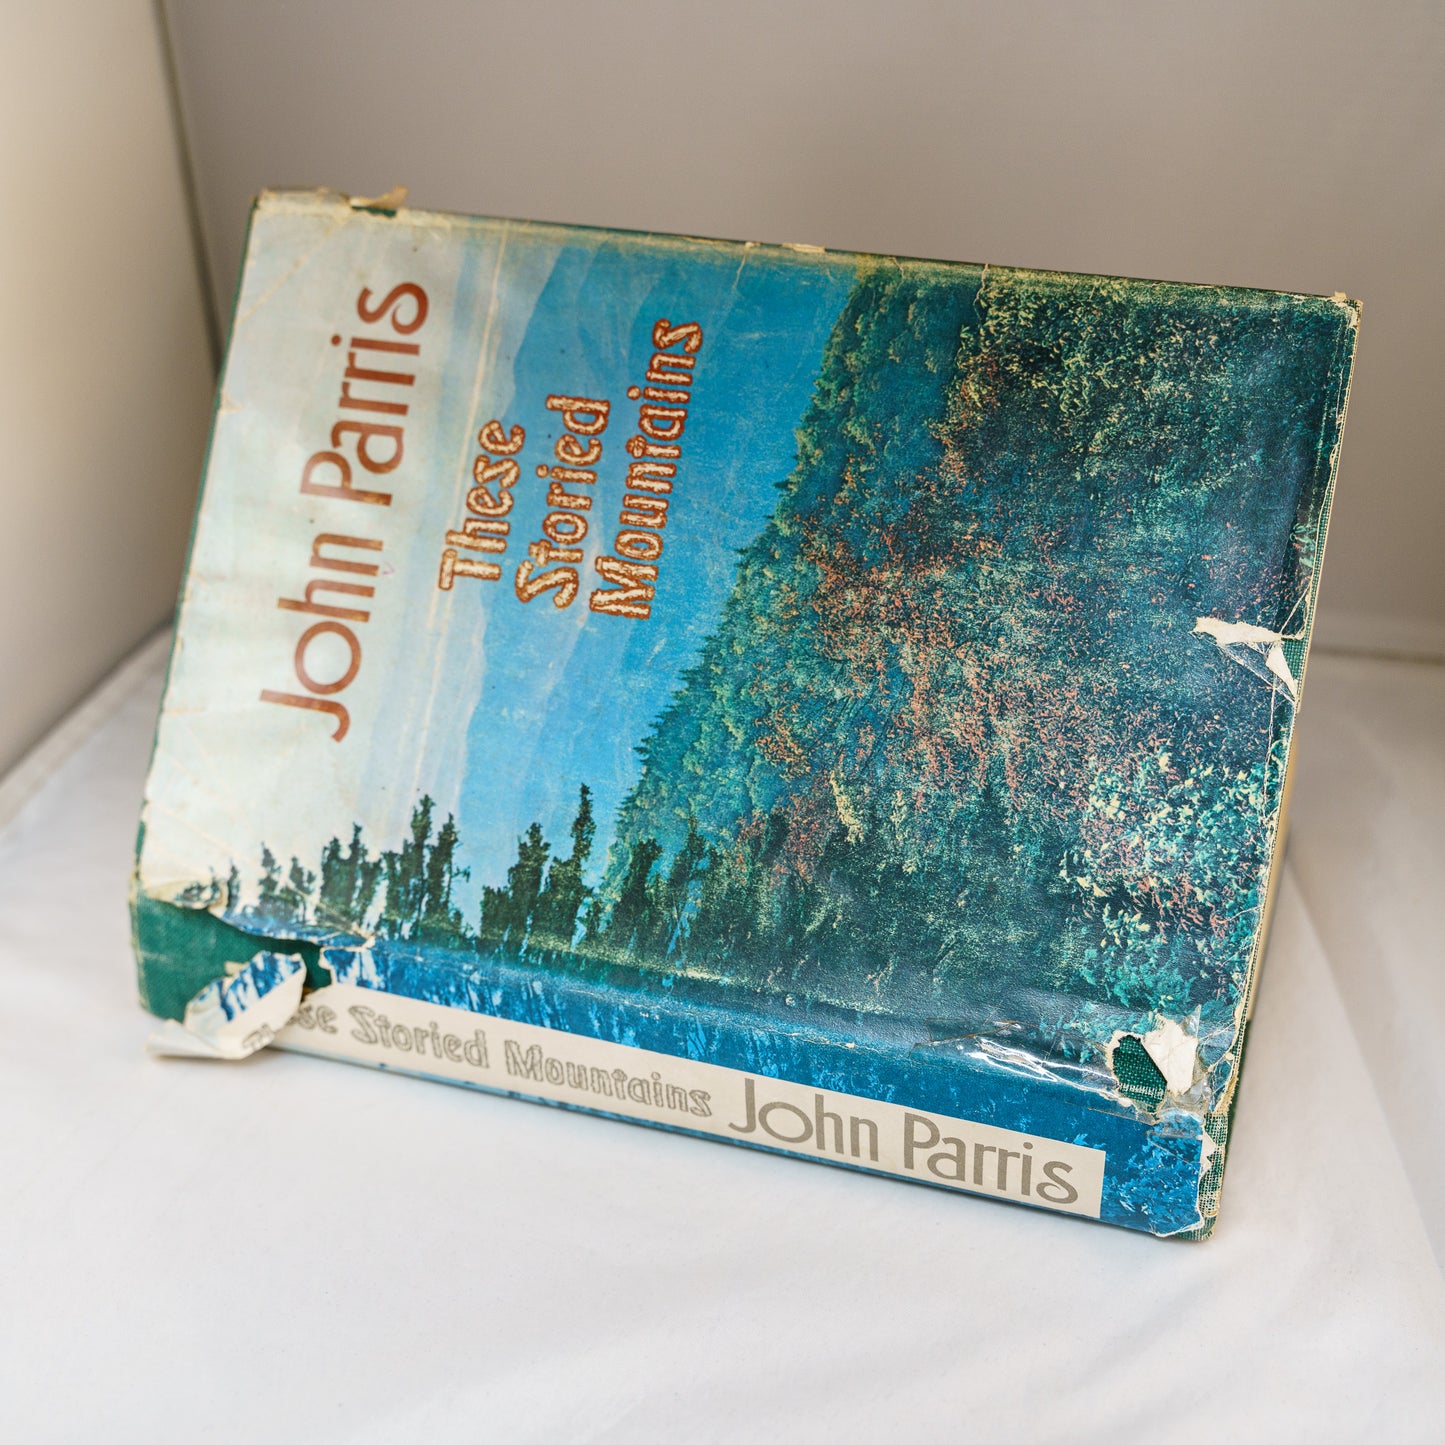 Collectible Book - These Storied Mountains, by John Parris.